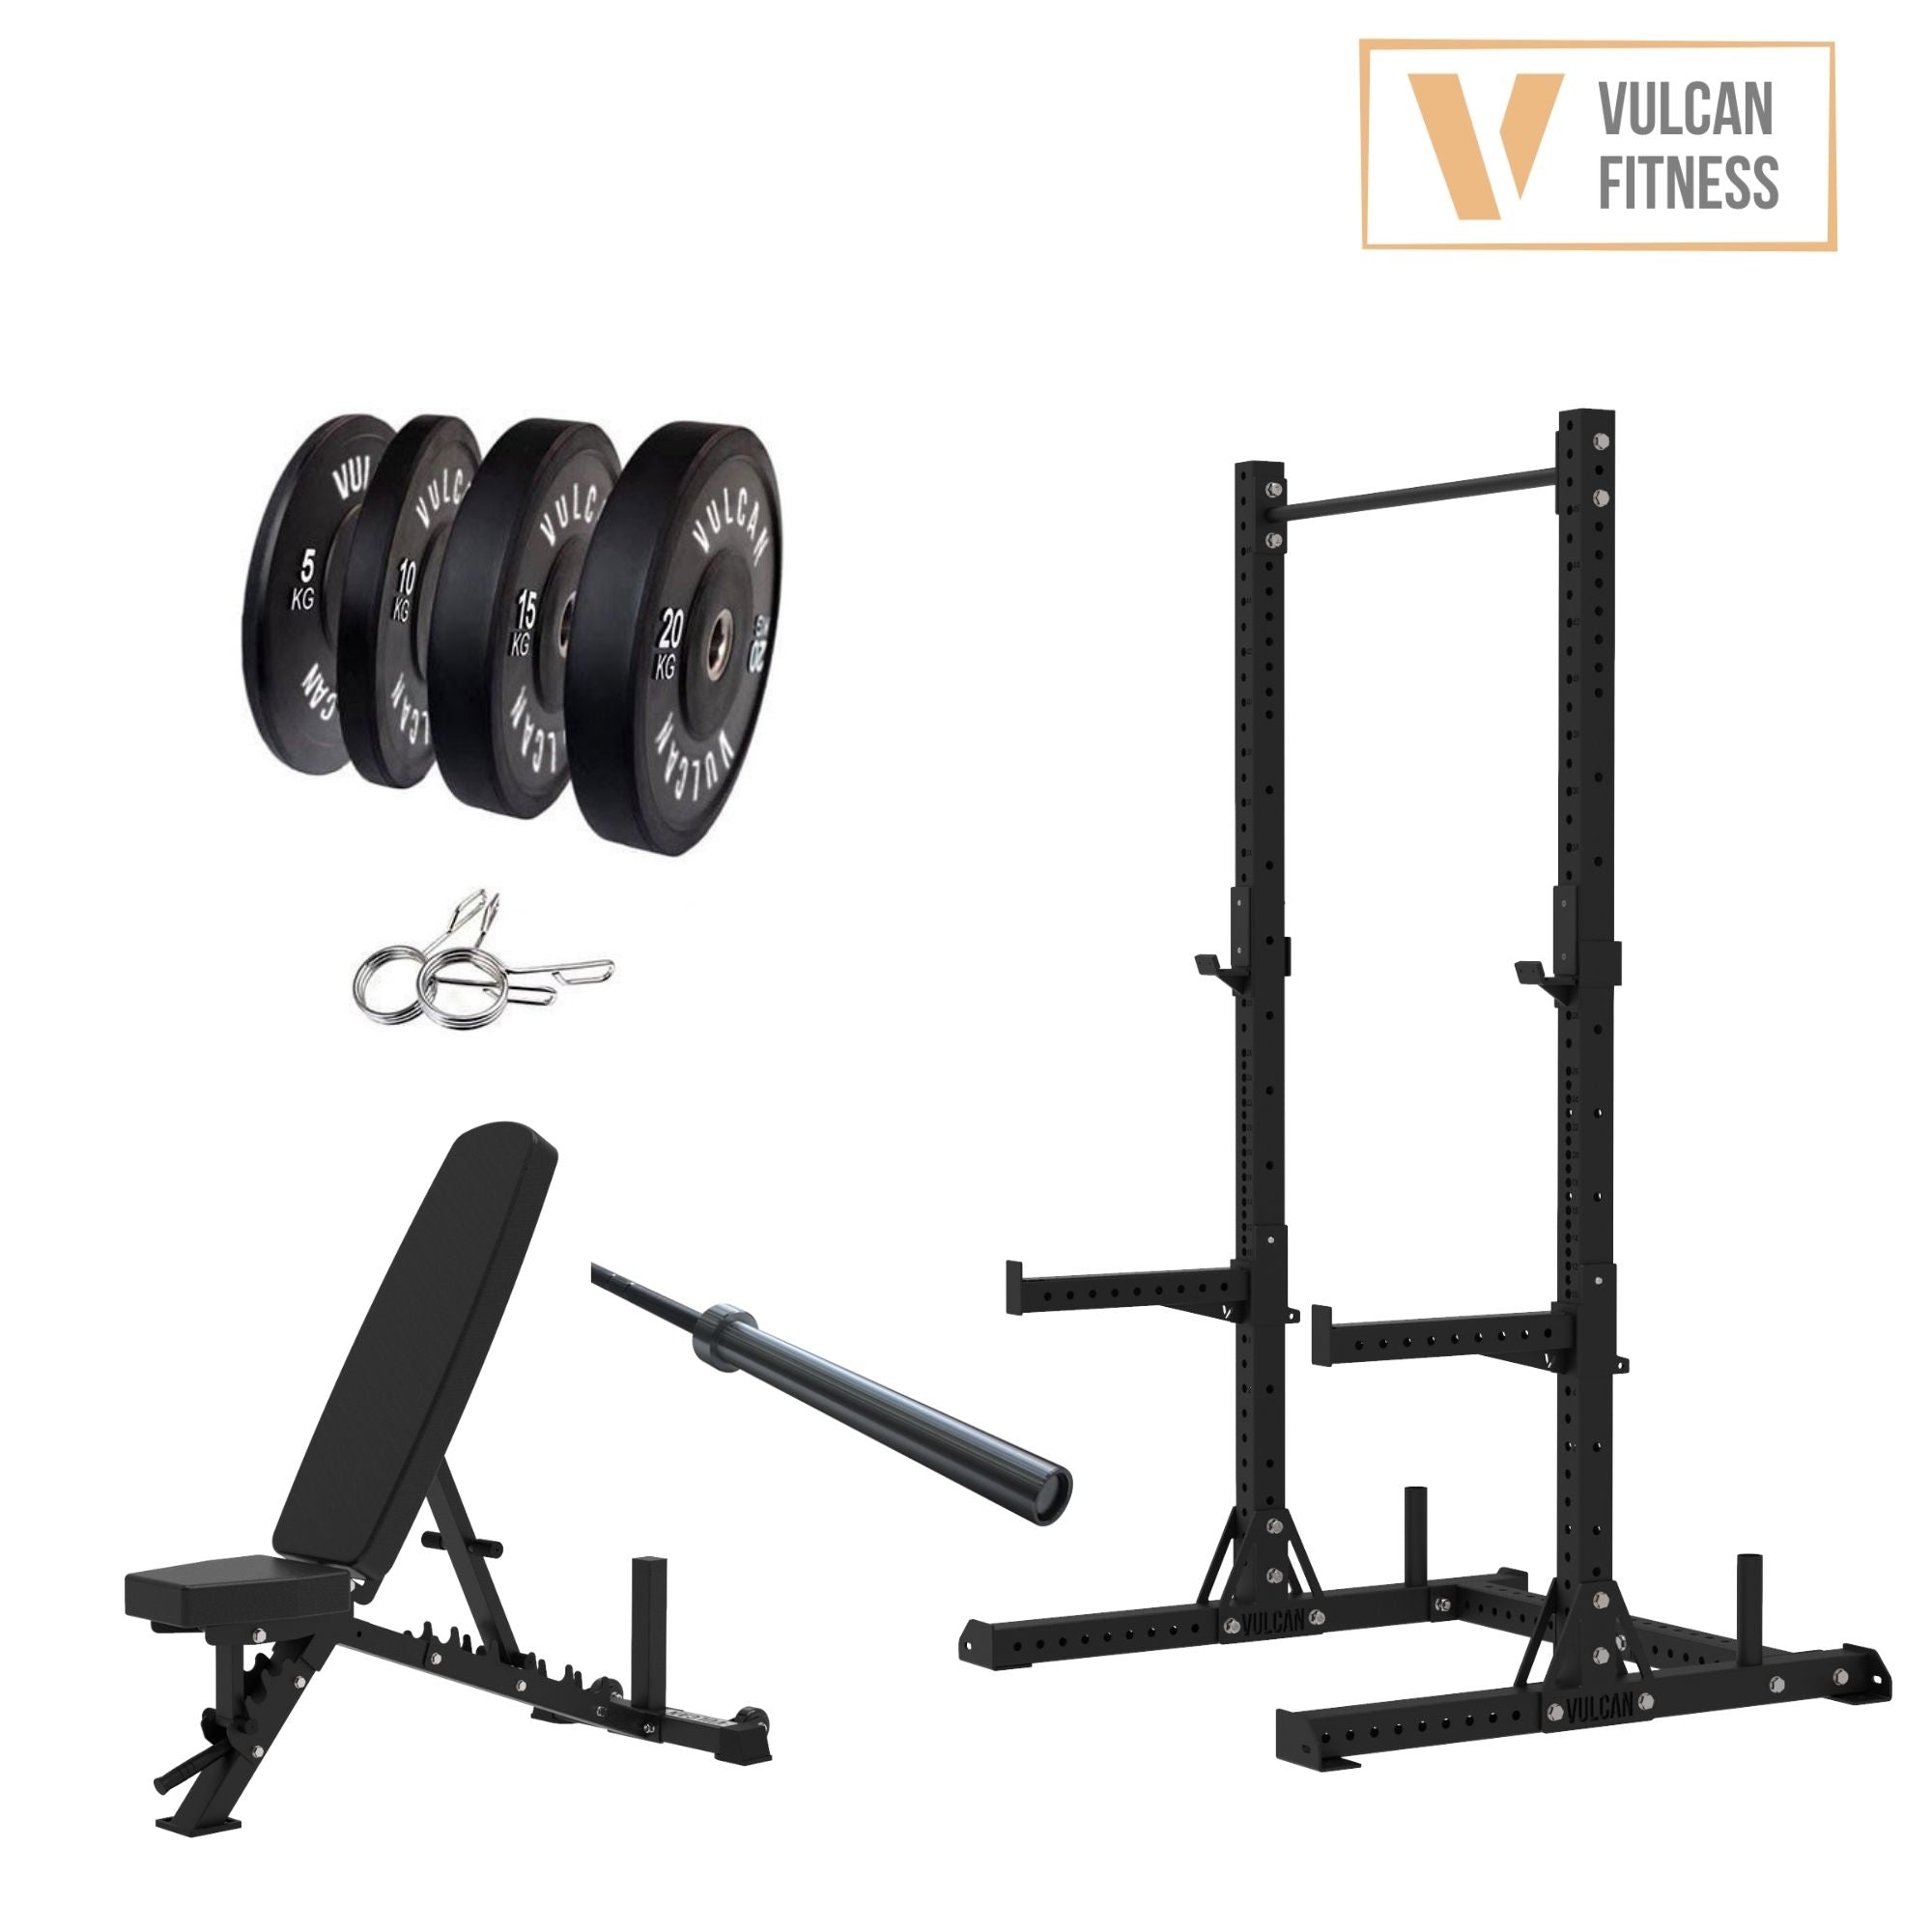 VULCAN Elite Squat Rack, Olympic Barbell, 100kg Black Bumper Weight Plates & Pro Adjustable Bench | IN STOCK